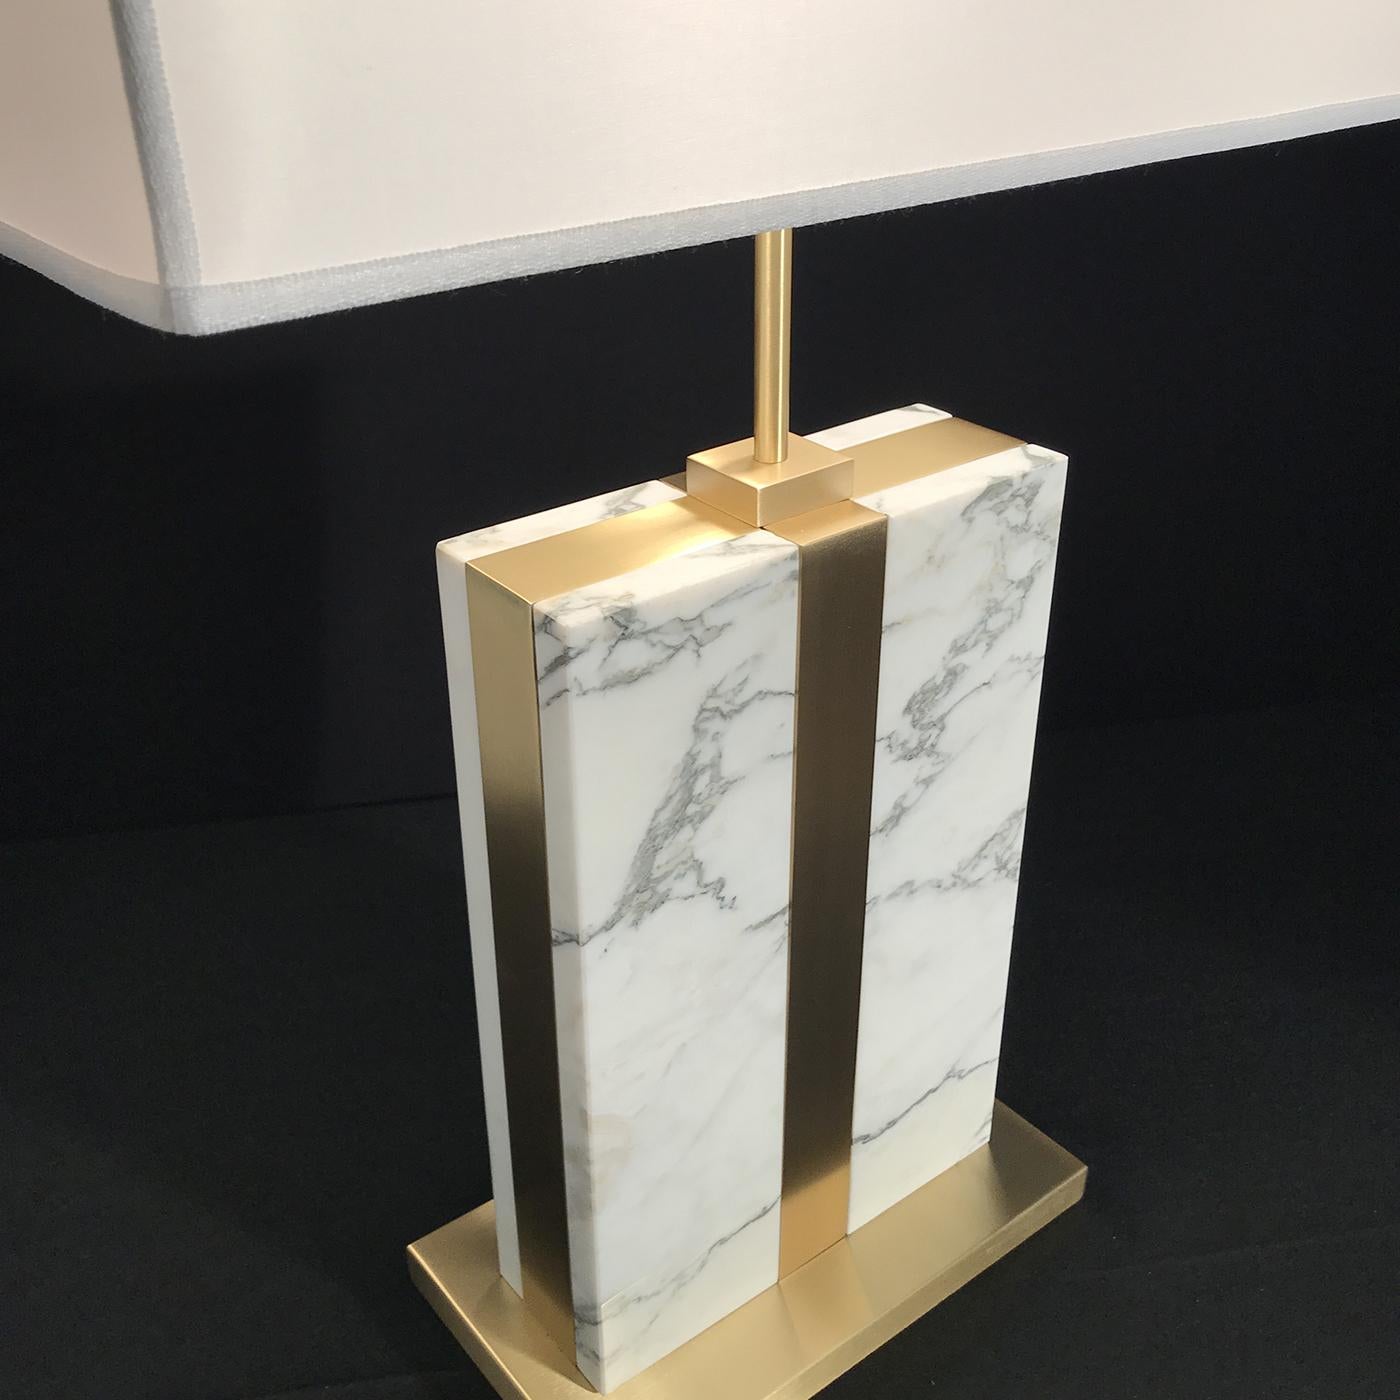 Precious materials work in unison to deliver the elegant silhouette of this modern table lamp. Enclosed in a satin brass frame and raised on a square base, the superb Arabascato Carrara marble draws in the focus while reflecting a warm glow from the